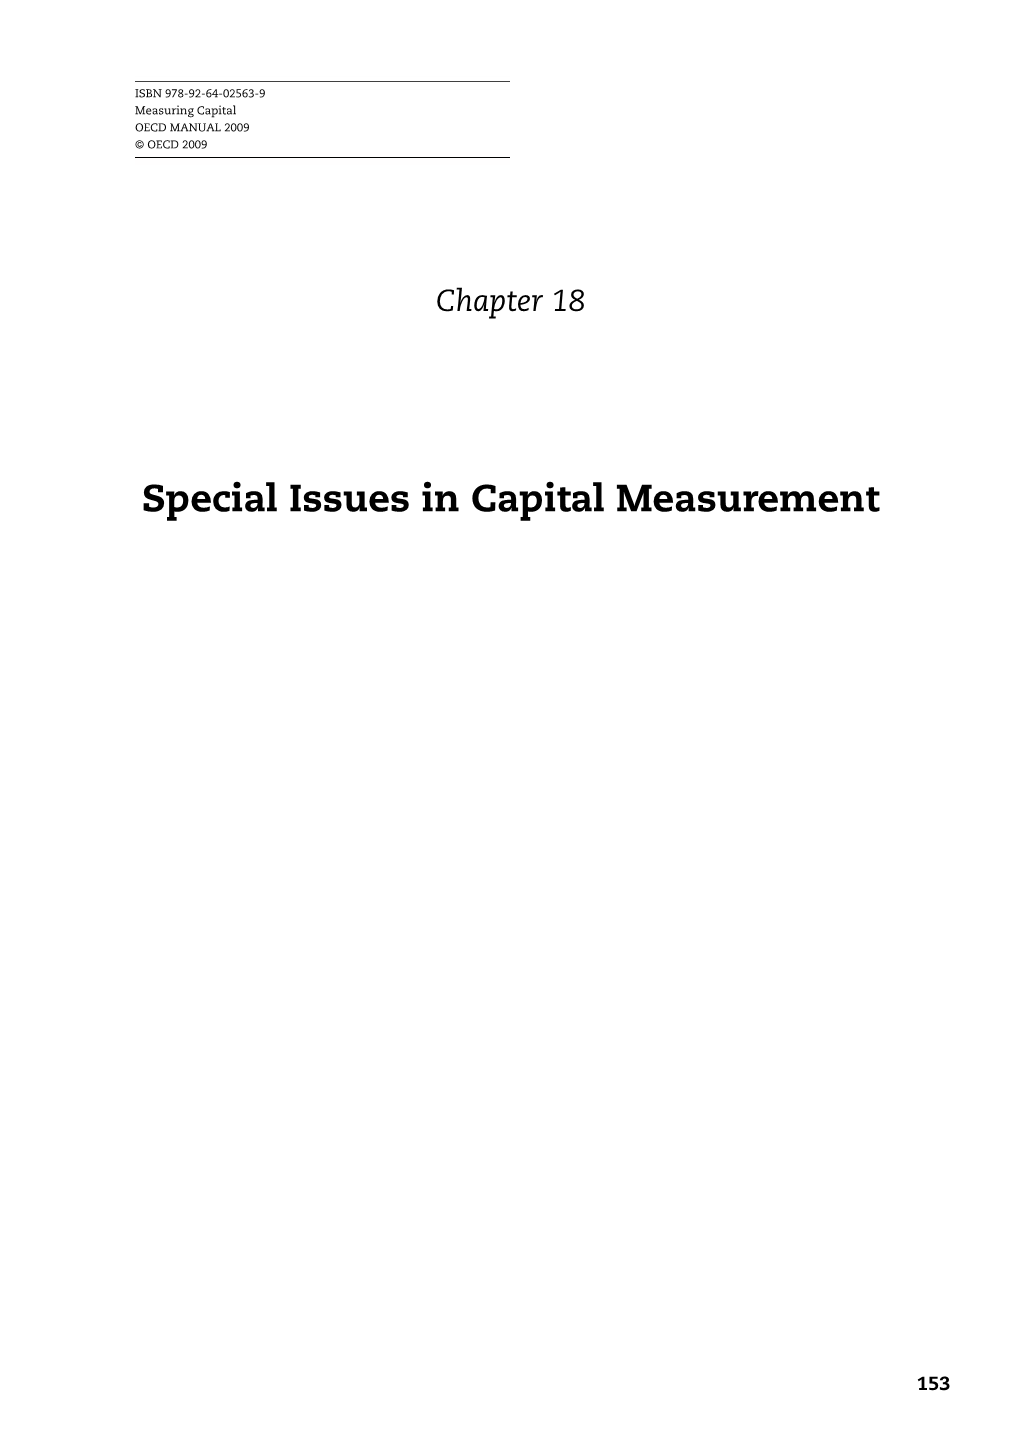 Special Issues in Capital Measurement